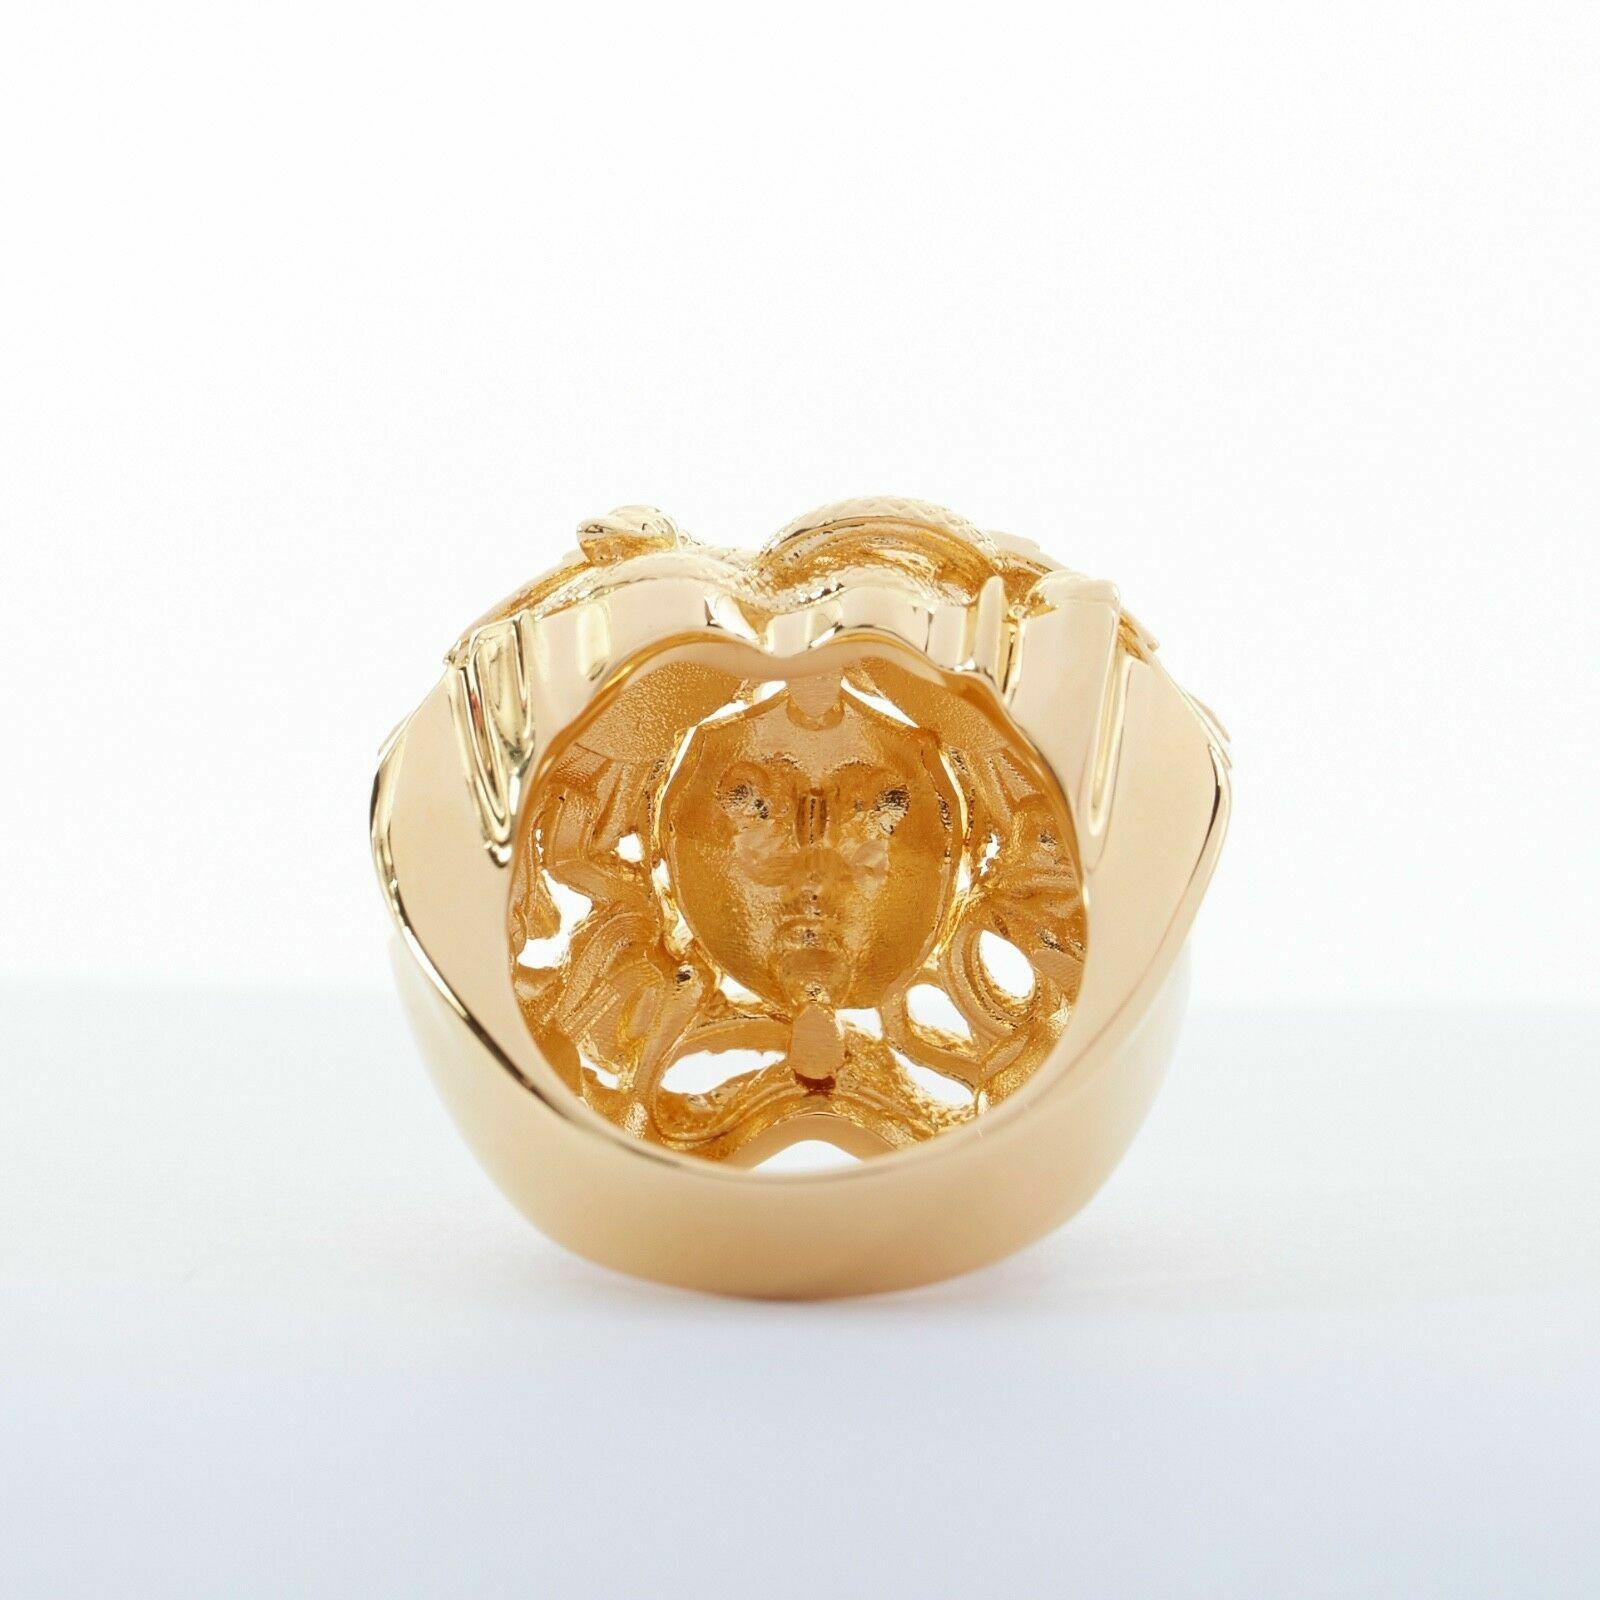 new VERSACE Palazzo Medusa snake head gold plated large statement ring 10.25 1